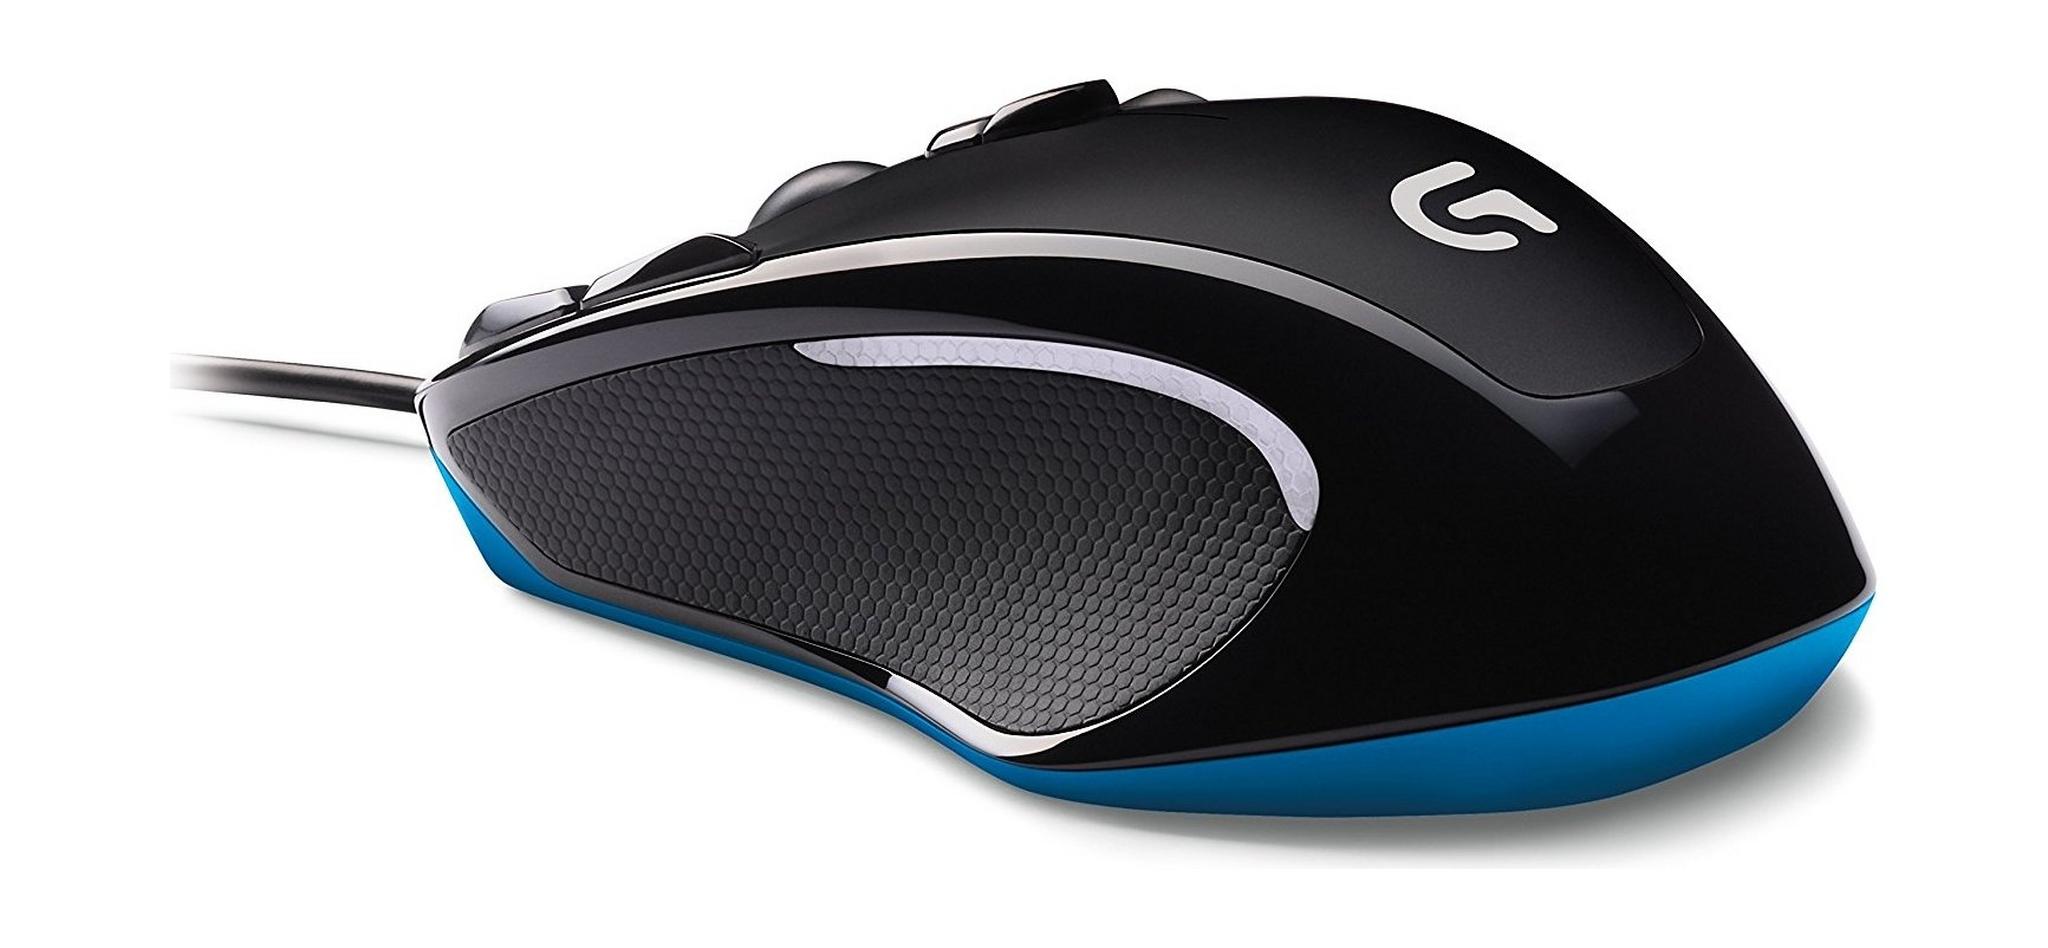 Logitech G300s Optical Ambidextrous Wired Gaming Mouse - Black